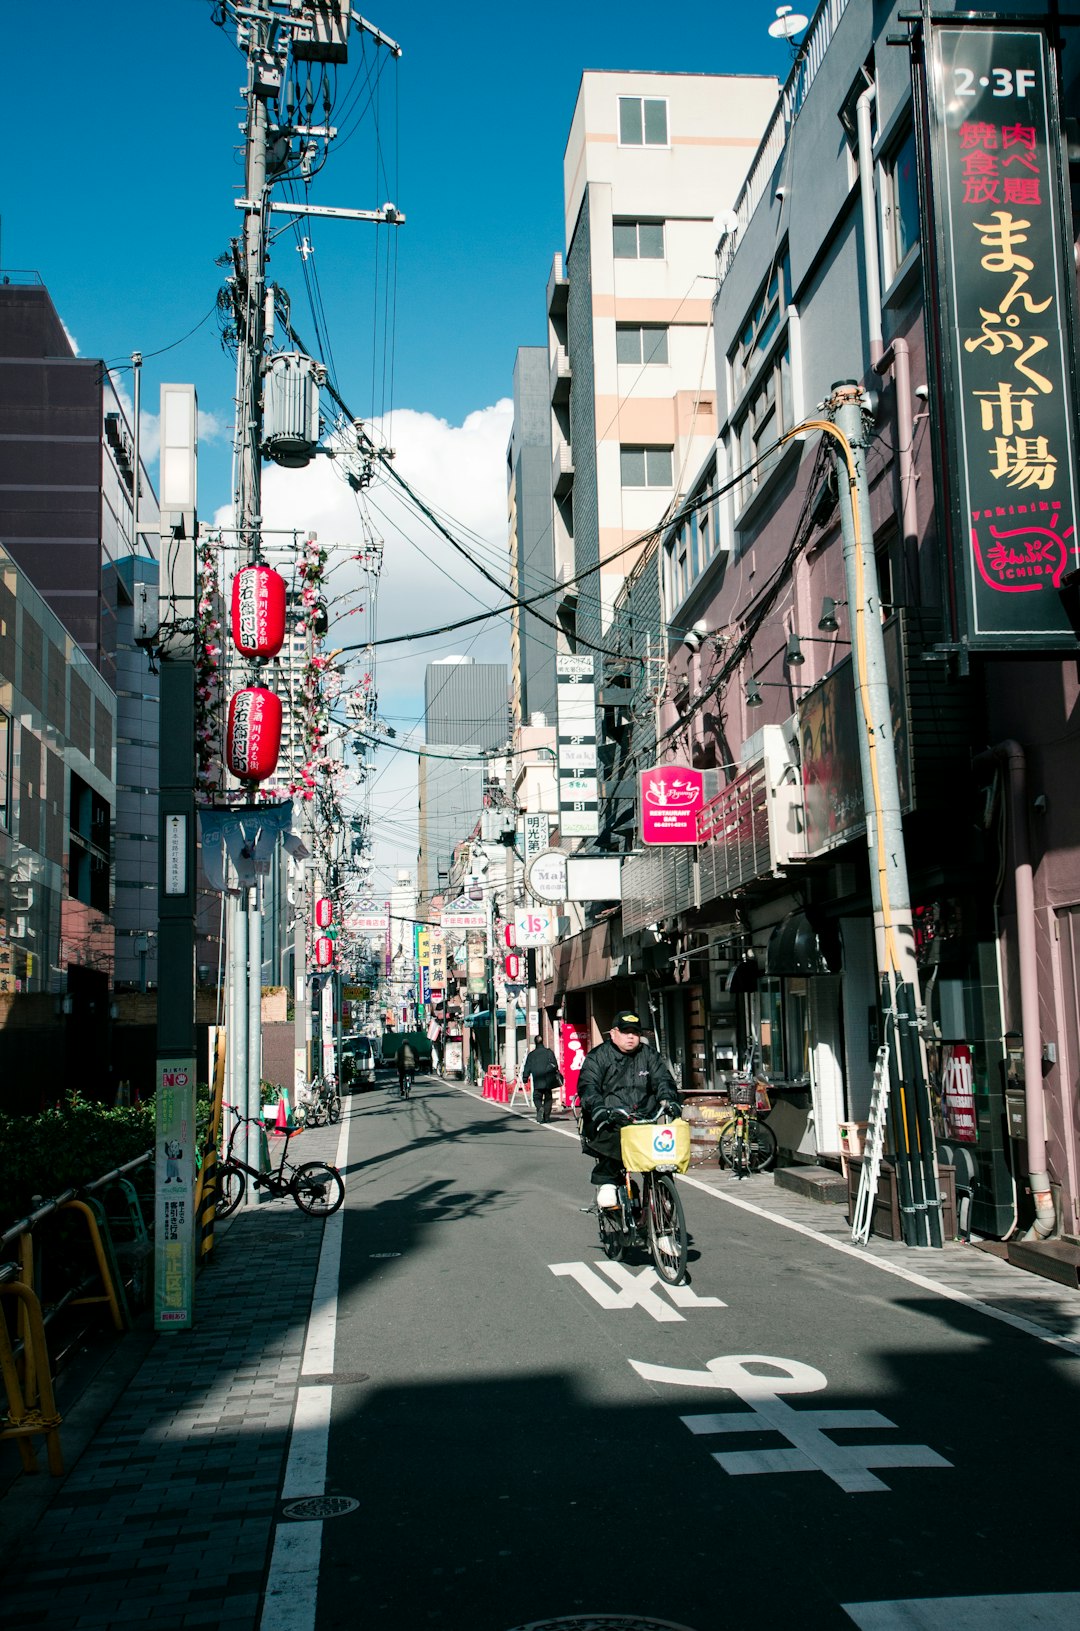 Travel Tips and Stories of Nipponbashi in Japan